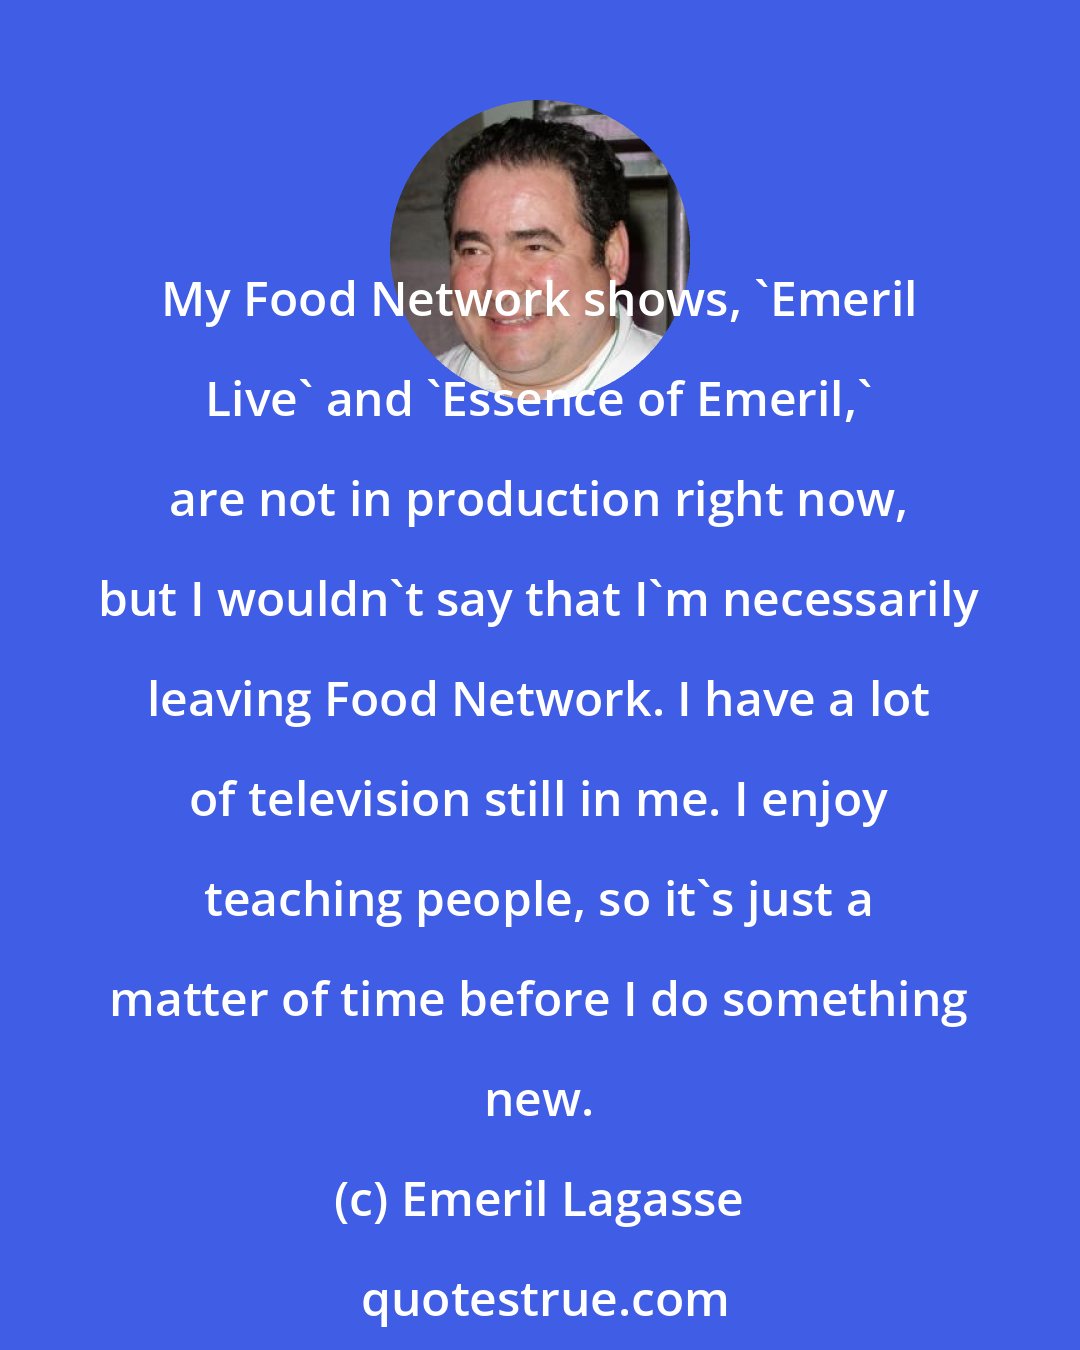 Emeril Lagasse: My Food Network shows, 'Emeril Live' and 'Essence of Emeril,' are not in production right now, but I wouldn't say that I'm necessarily leaving Food Network. I have a lot of television still in me. I enjoy teaching people, so it's just a matter of time before I do something new.